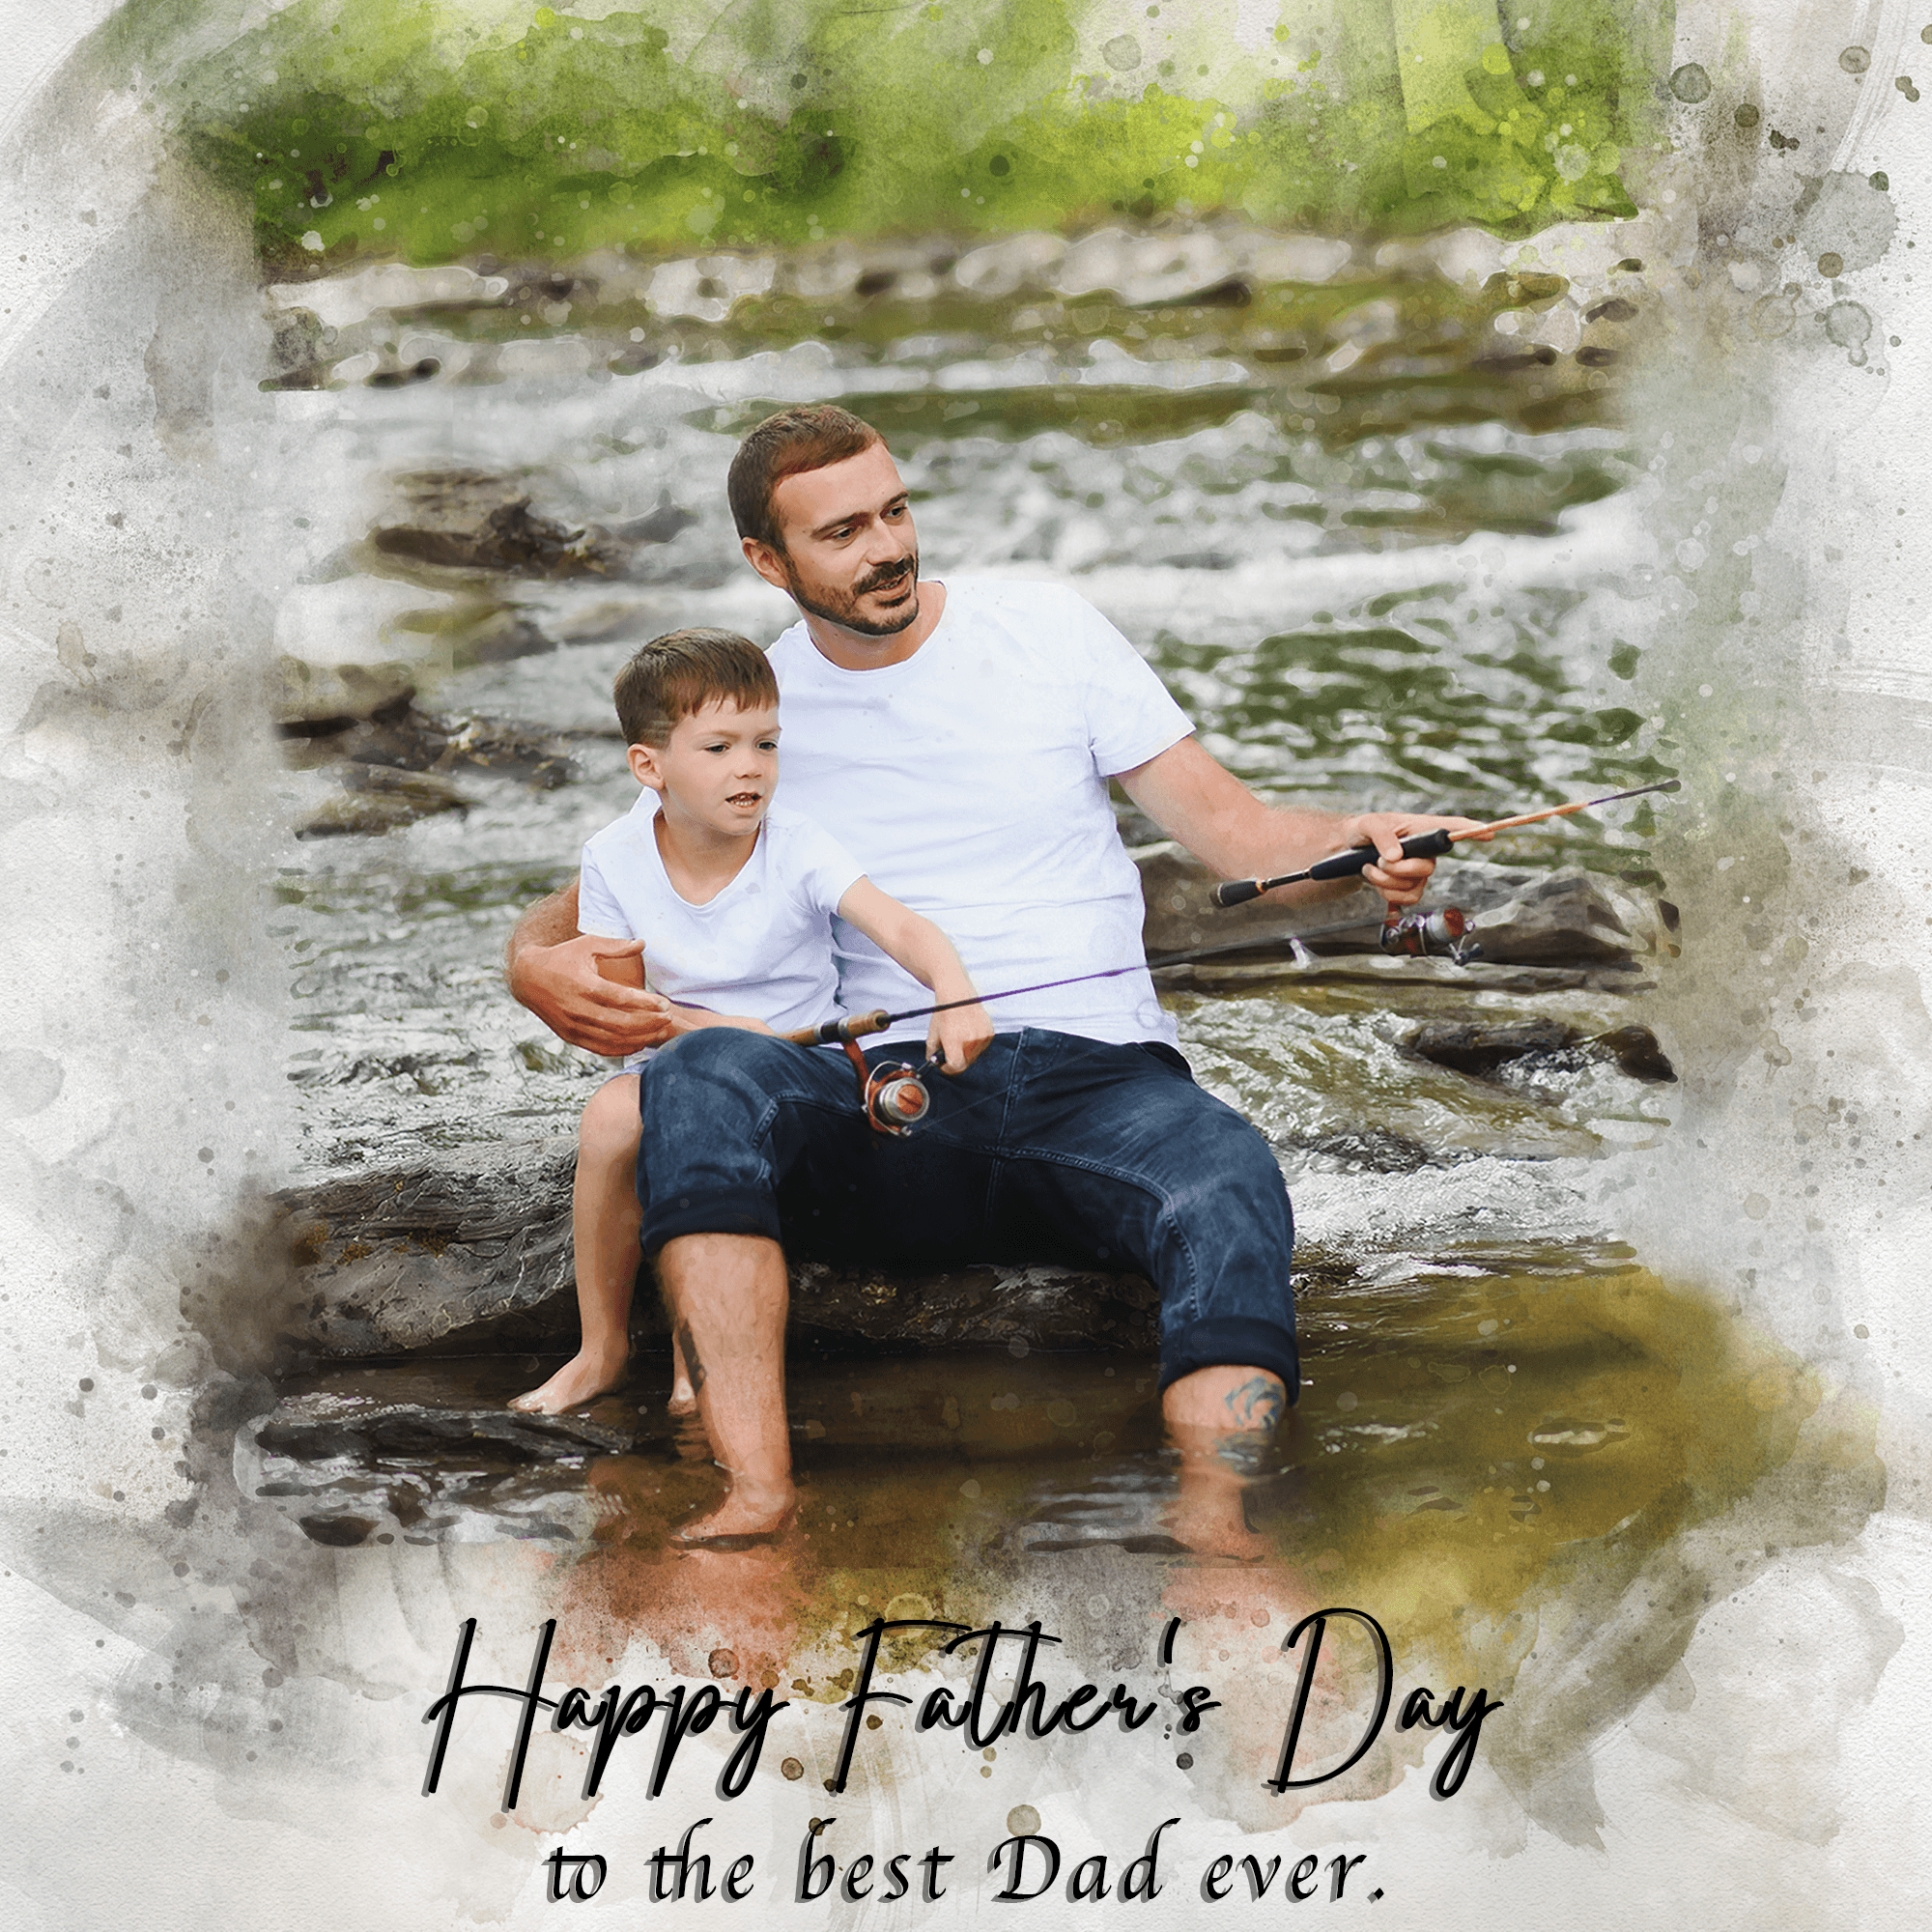 Birthday Presents for Dad | Custom Painted Portraits on Canvas - FromPicToArt